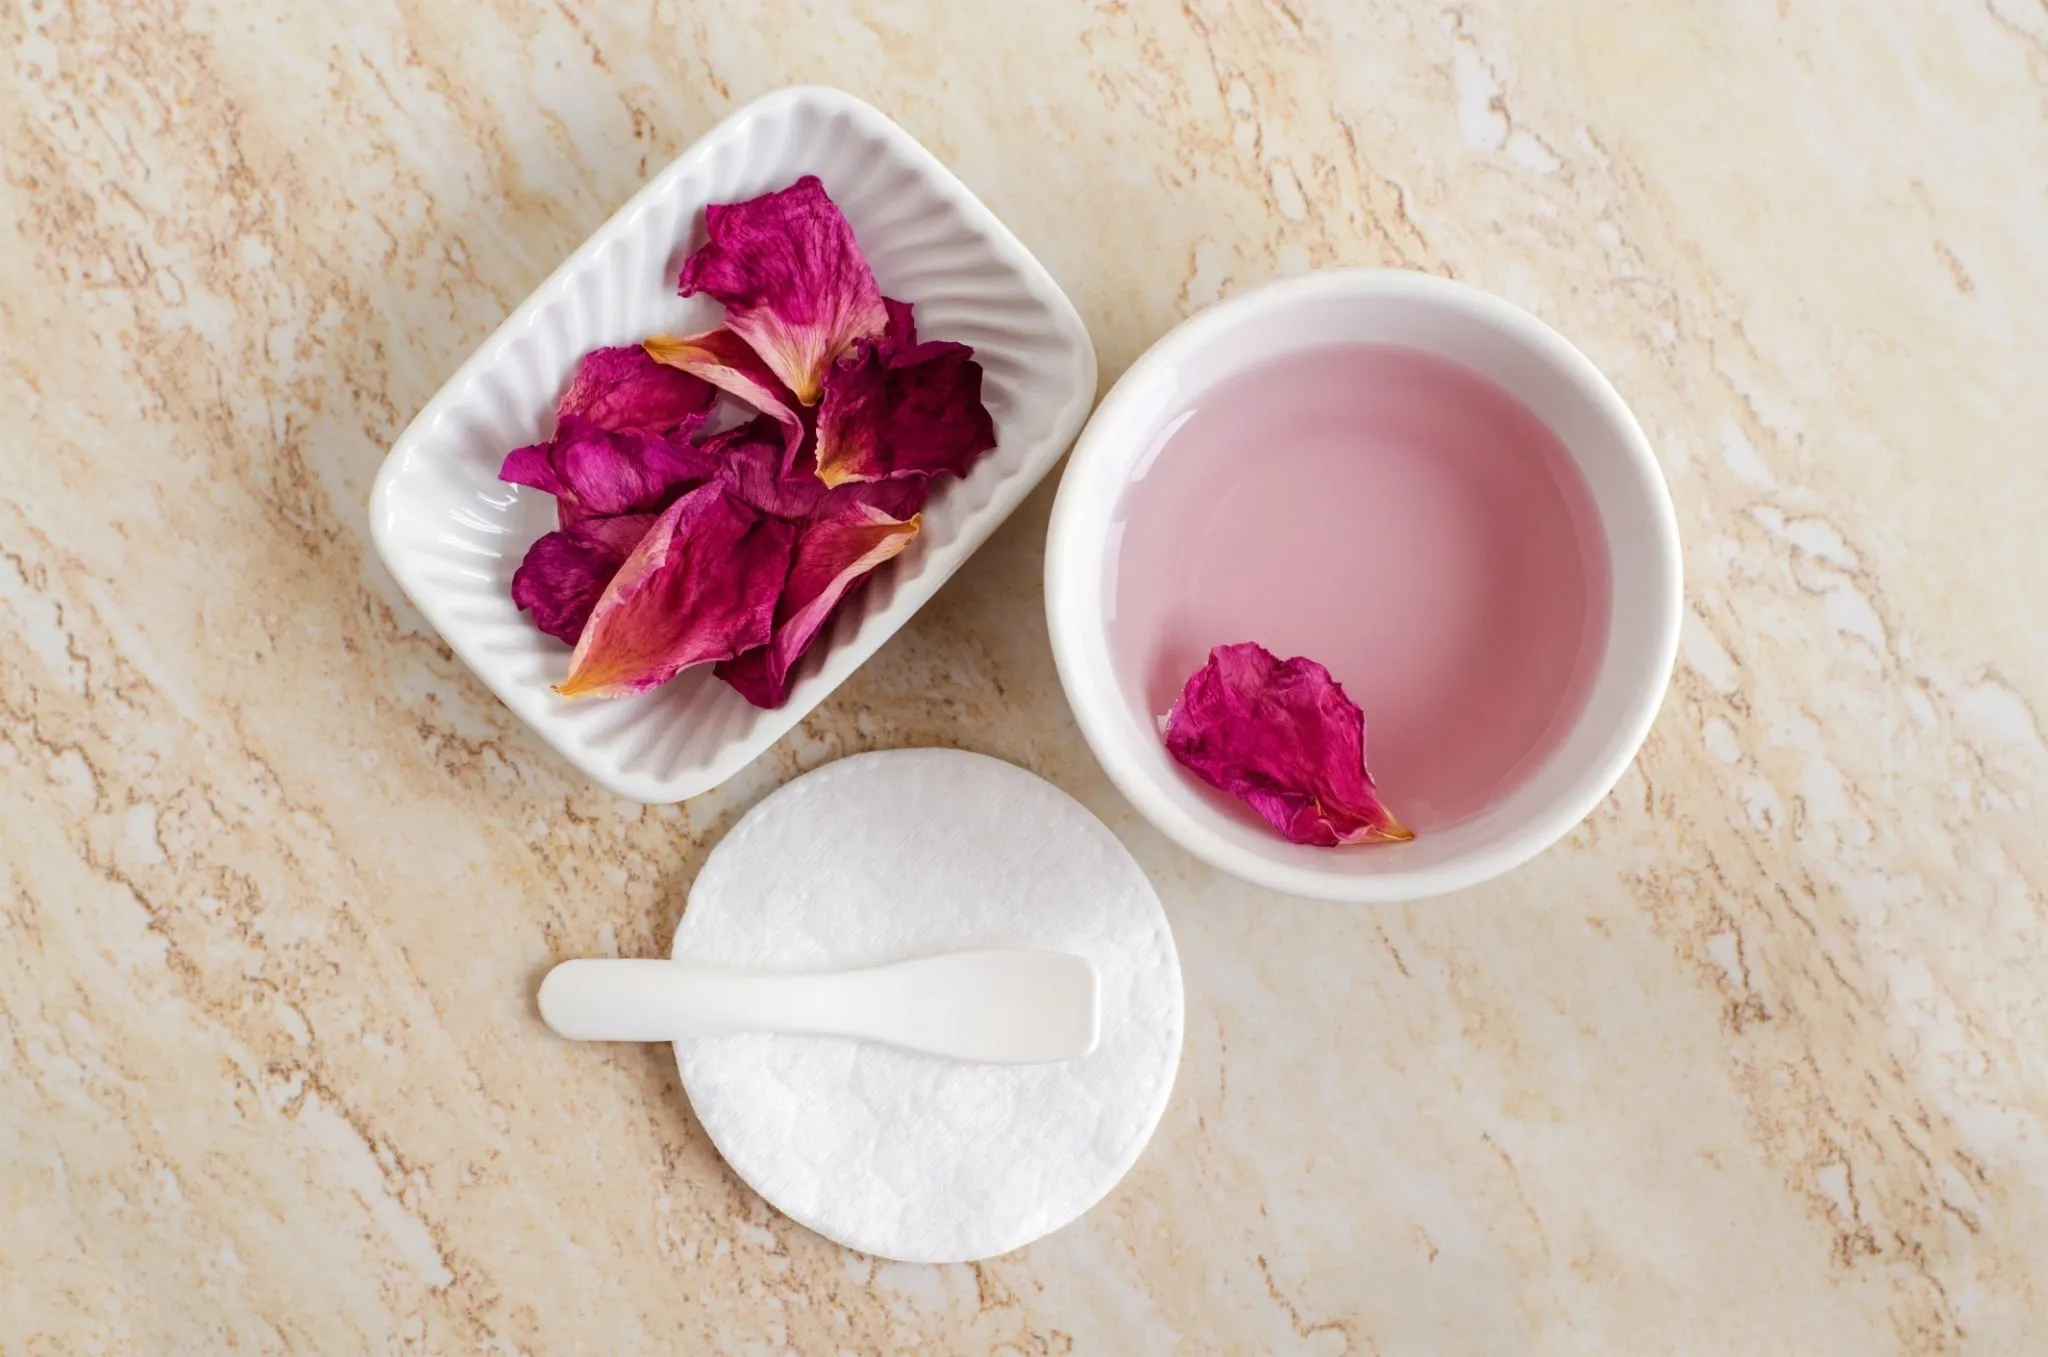 10 Best Rose Petal Powder Benefits for Skin, Hair and Lips